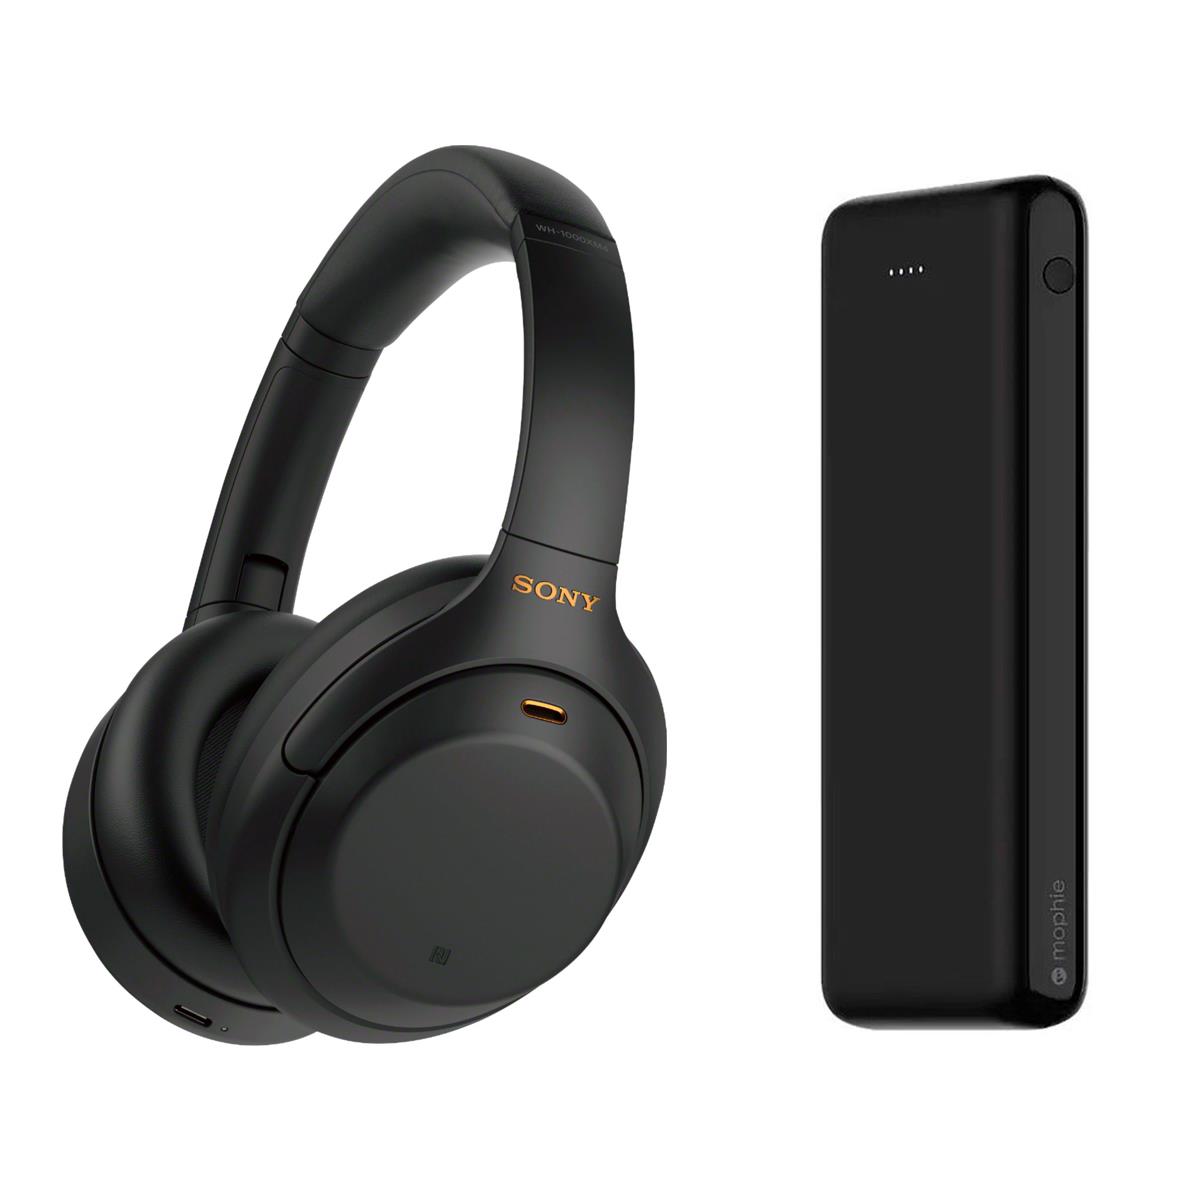 Sony WH-1000XM4 Wireless Over the Ear Noise Cancelling Headphones + Mophie Power Boost XXL 20800mAh Battery Power Bank - $248 w/ Free Shipping @ Adorama